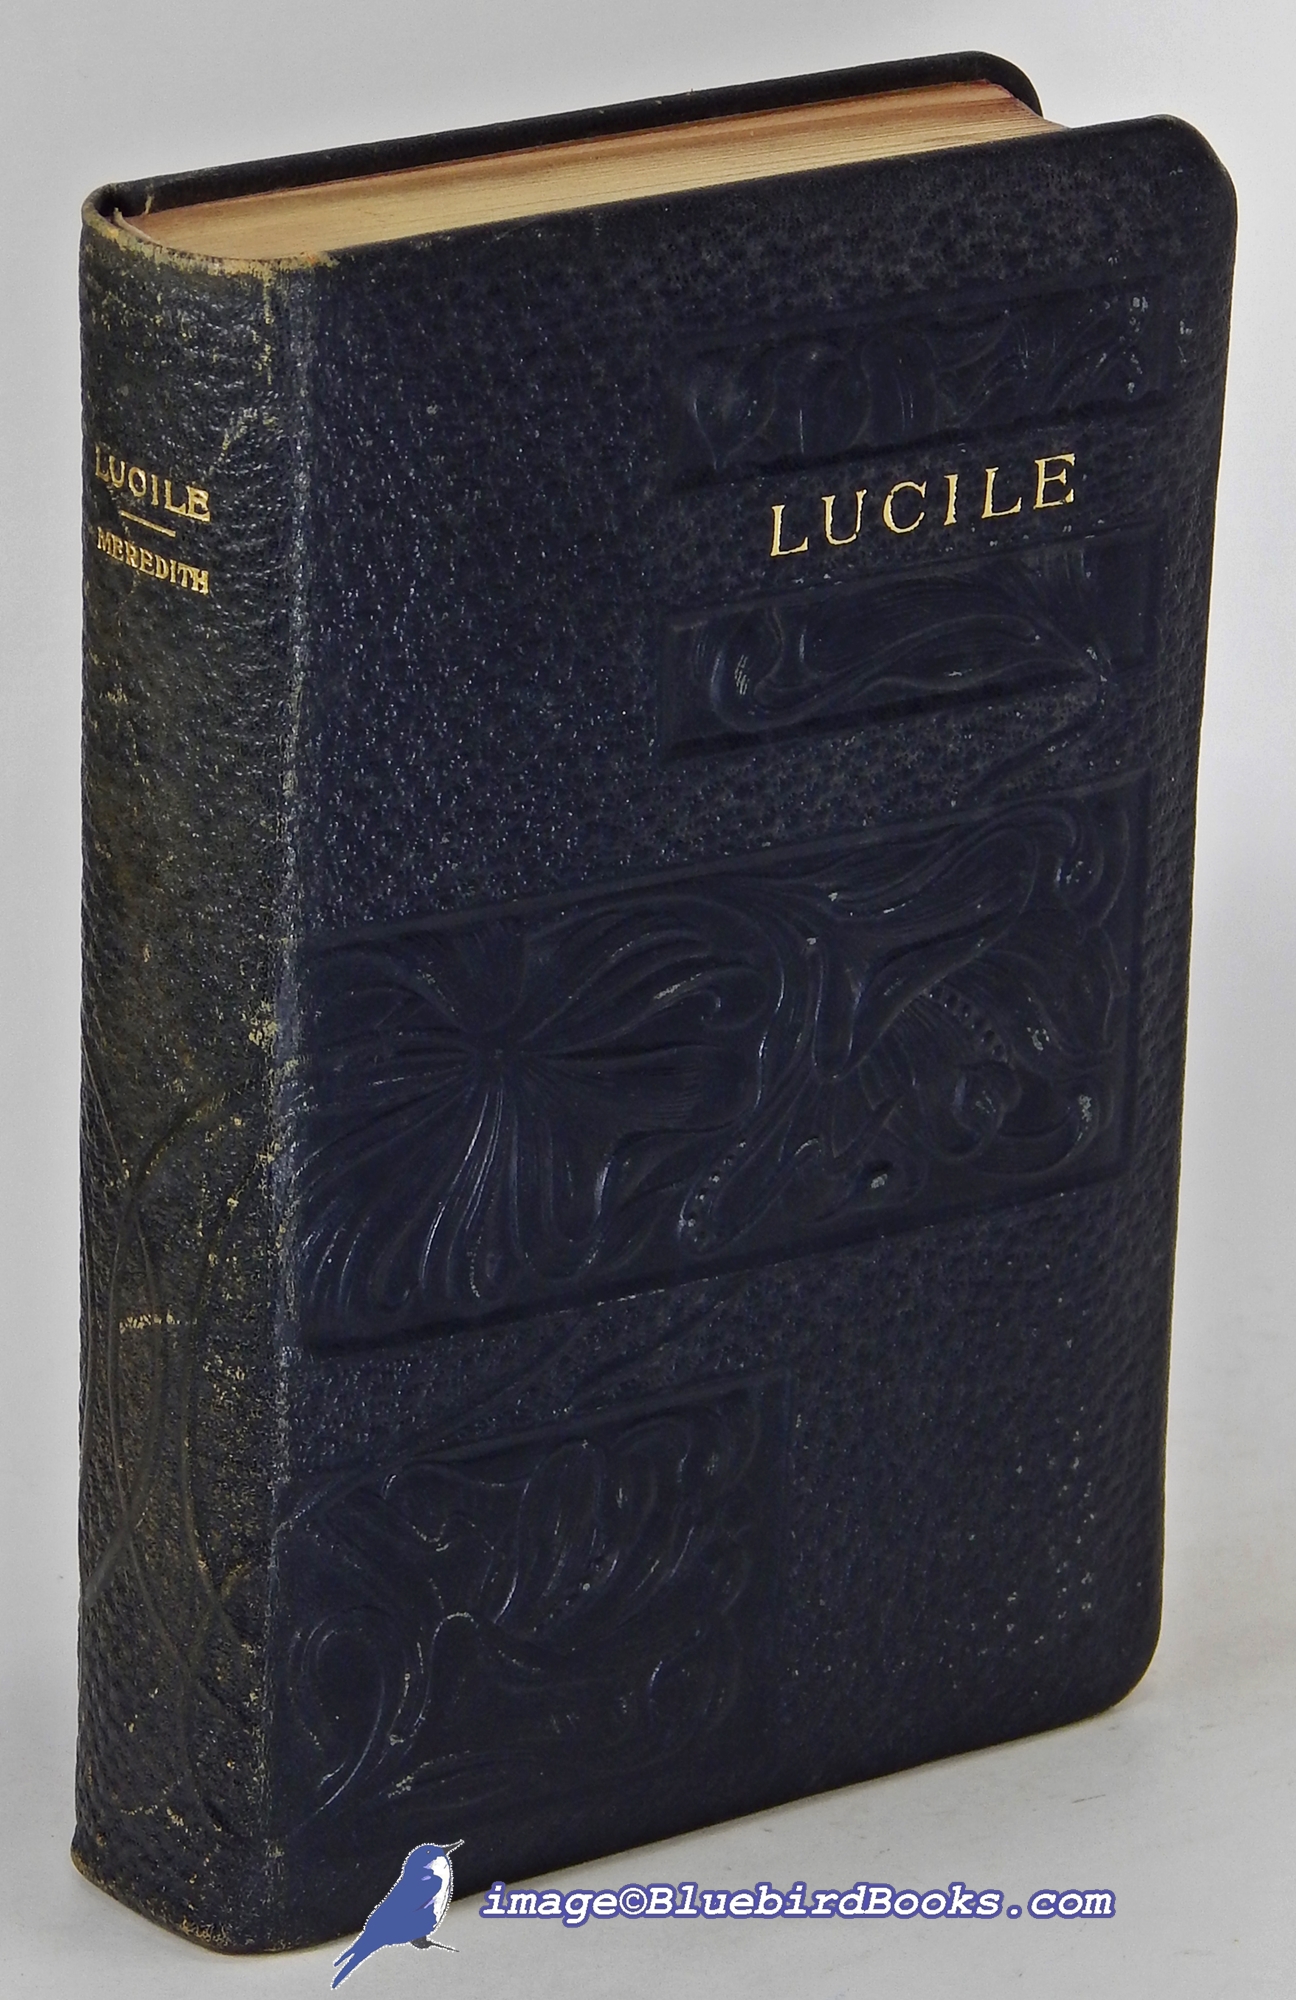 MEREDITH, OWEN [PSEUDONYM OF EDWARD ROBERT, FIRST EARL OF LYTTON (1831-1891)] - Lucile (in Deluxe Padded Leather Binding)